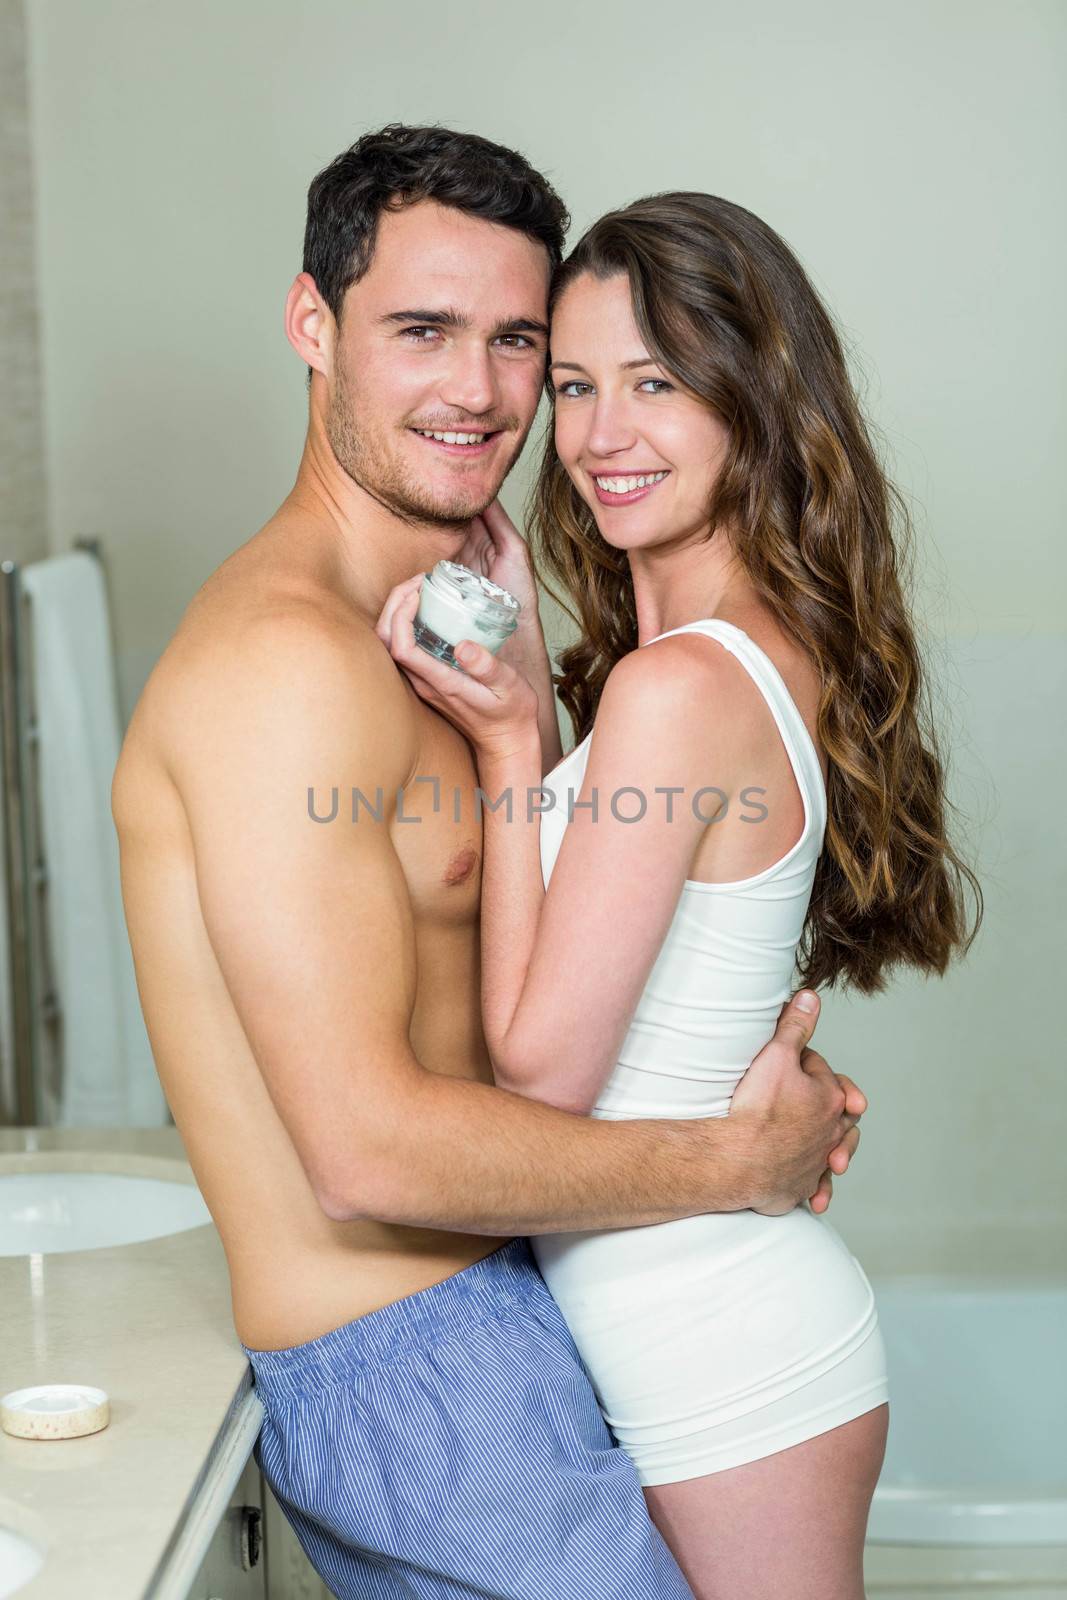 Portrait of romantic couple smiling and embracing in bathroom